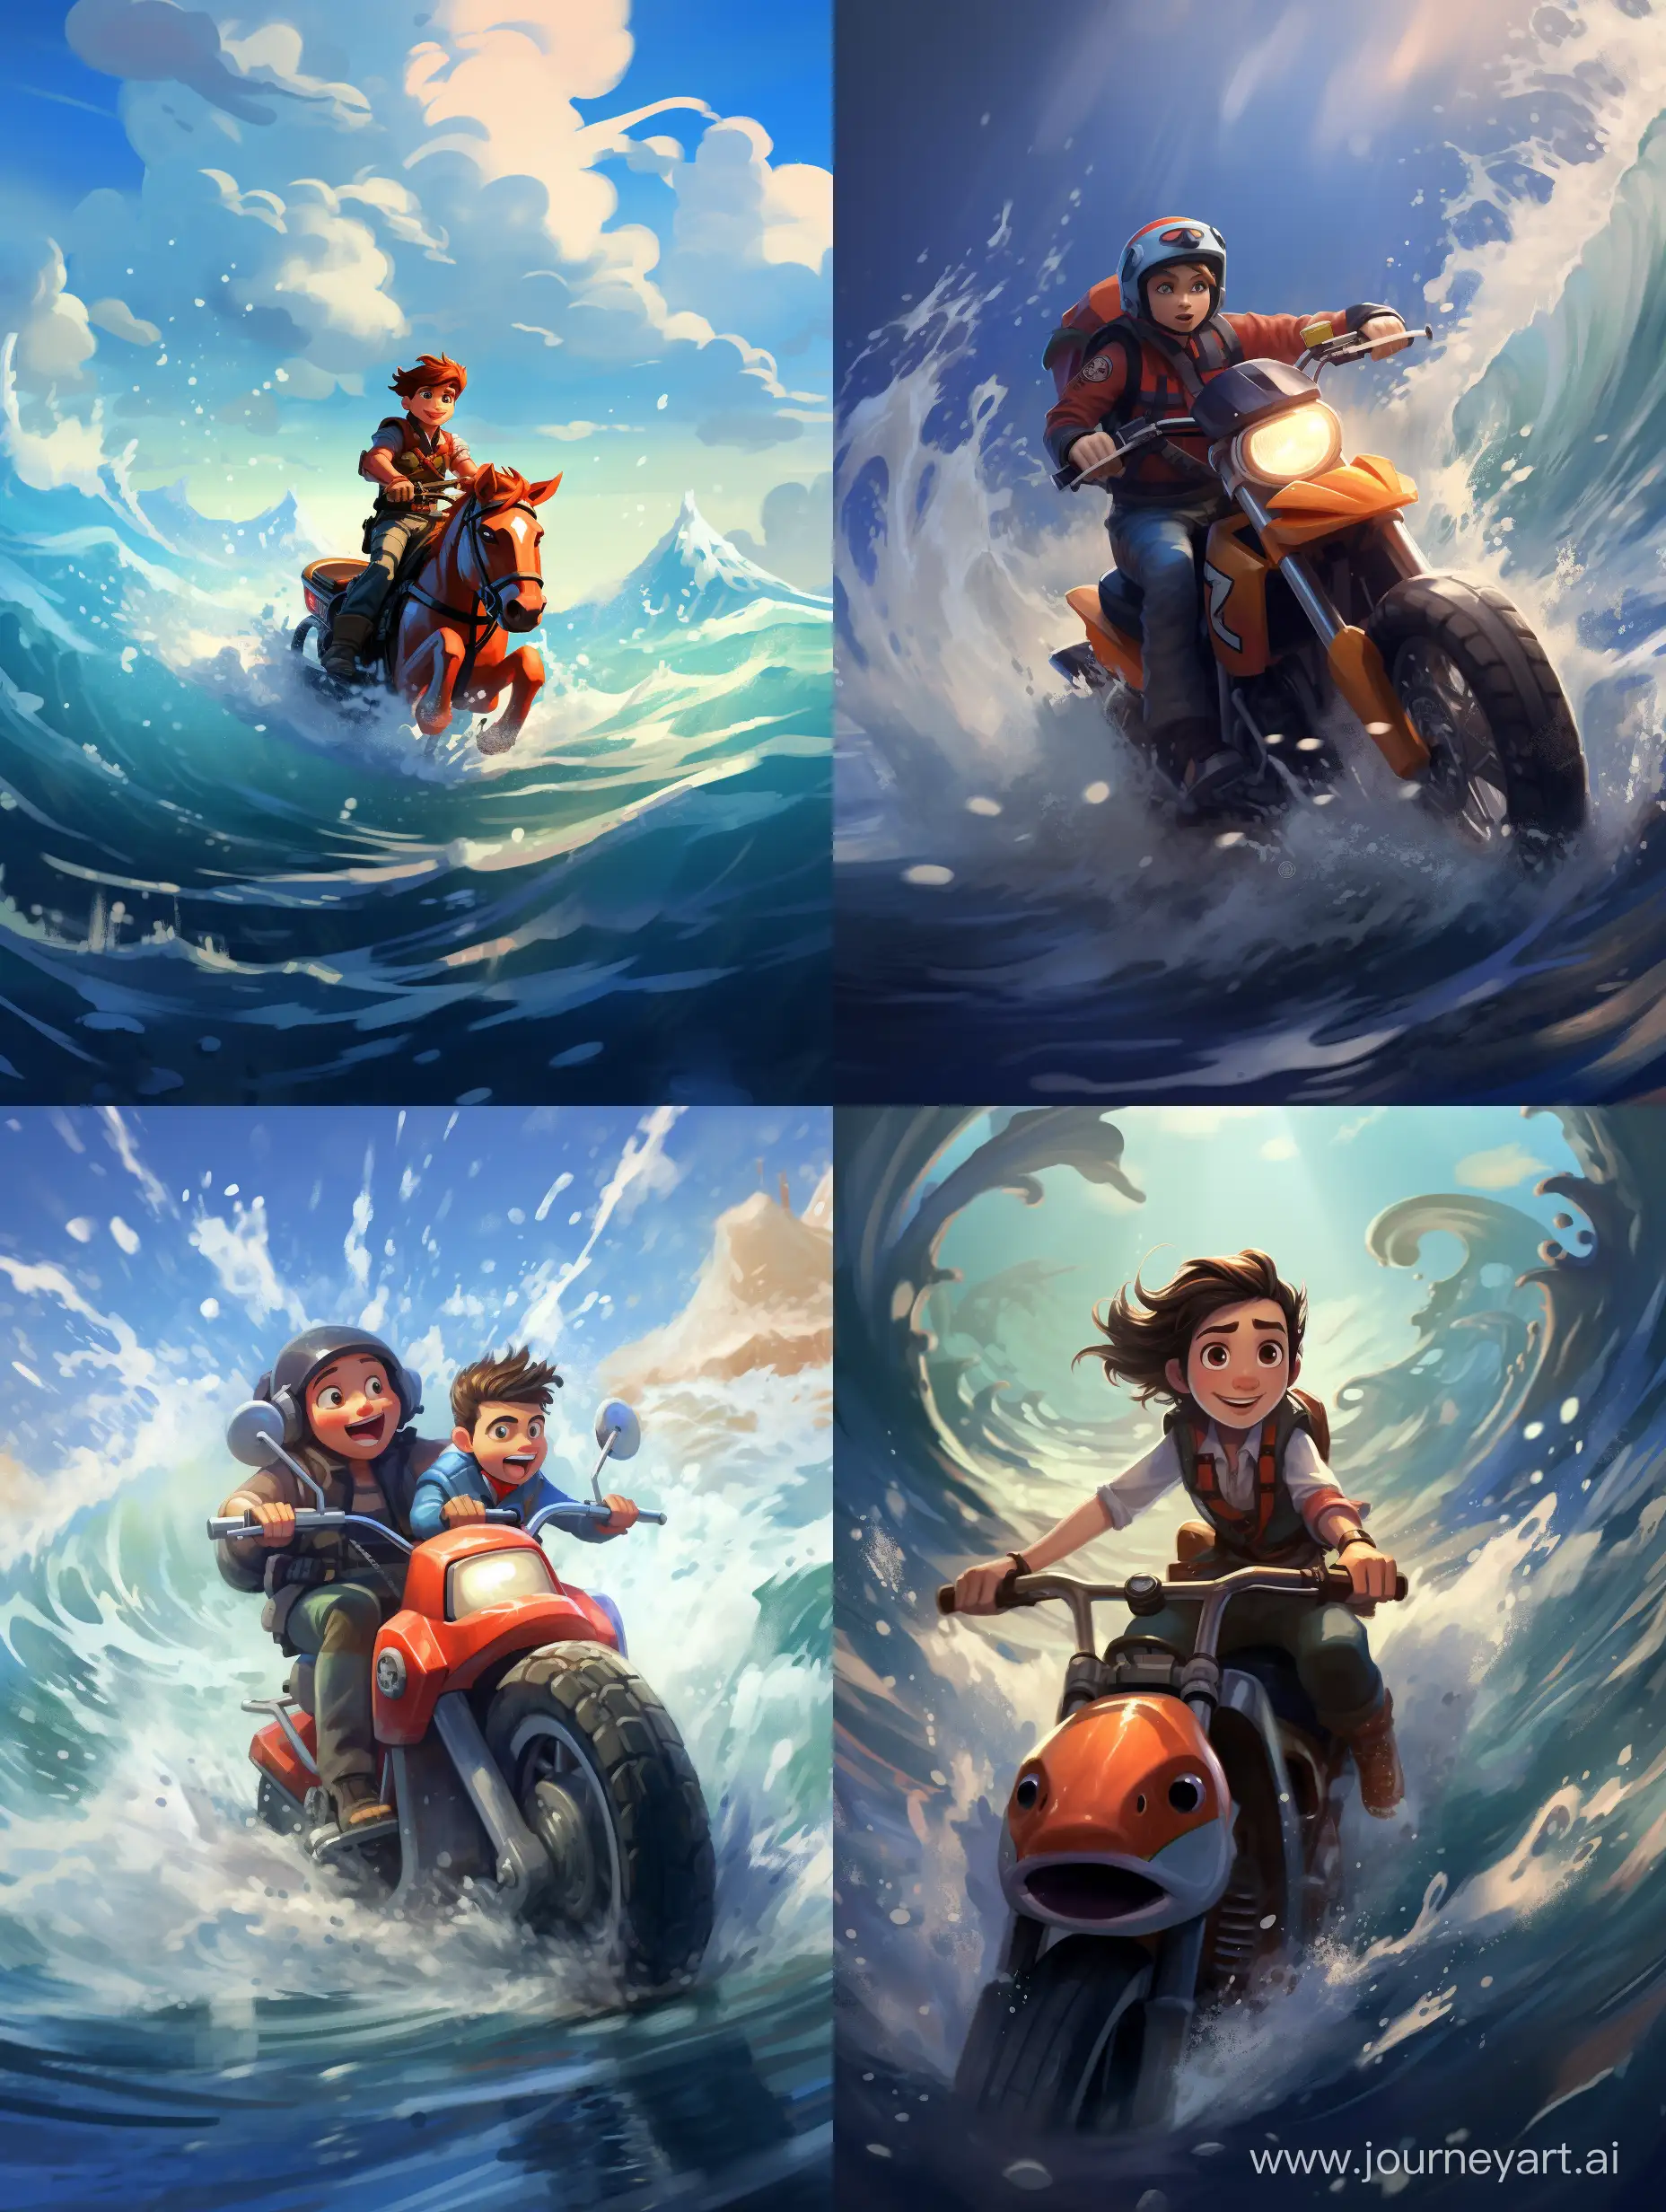 Riding in the rough water was an adventure. Pixar style 